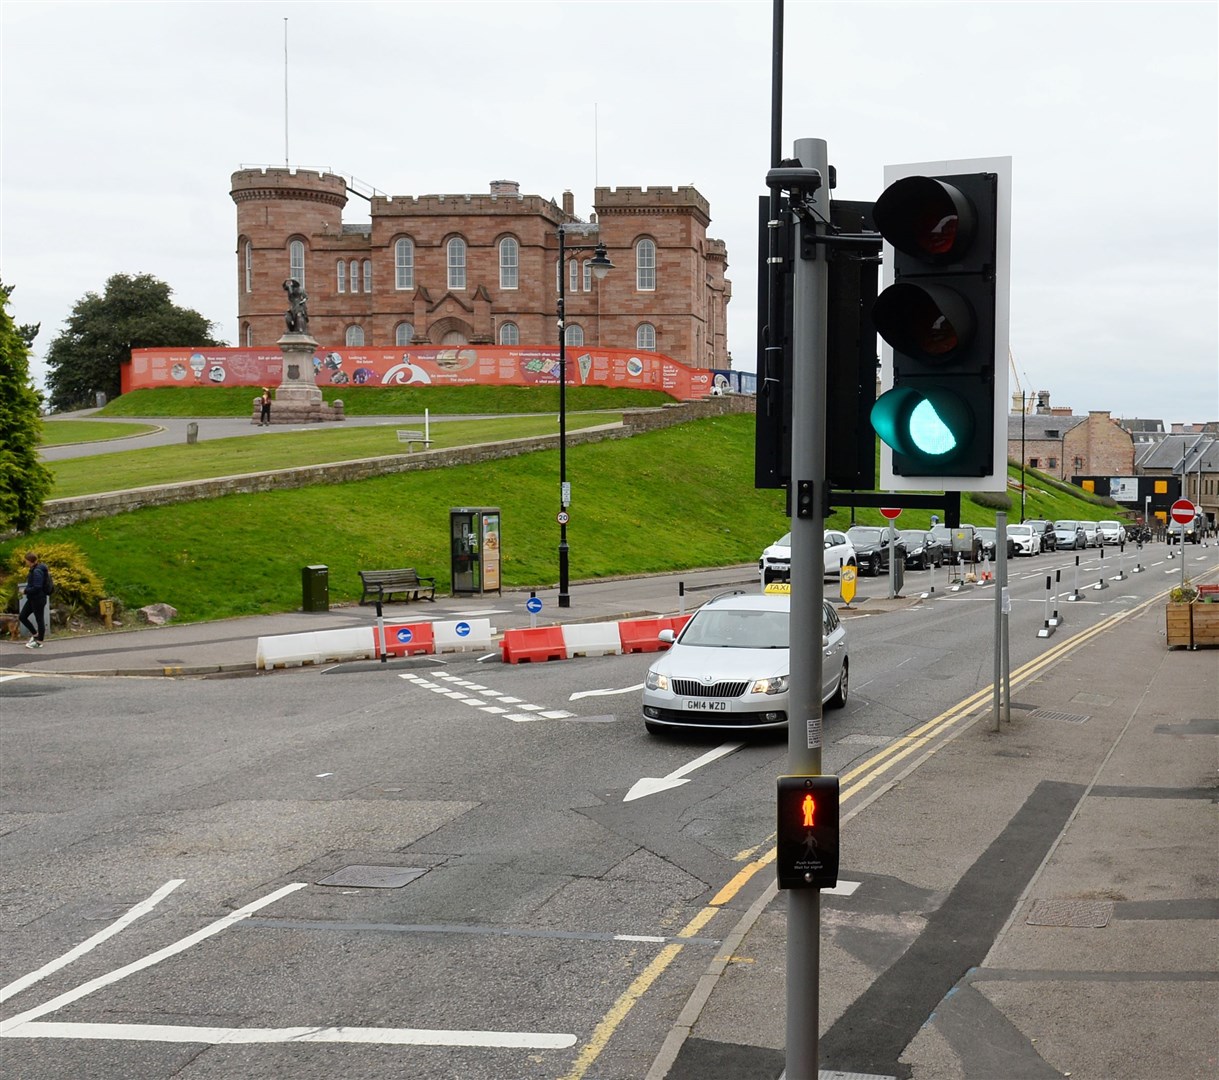 Green for go? Traffic light issues could mean the one-way route stays for another 14 weeks.